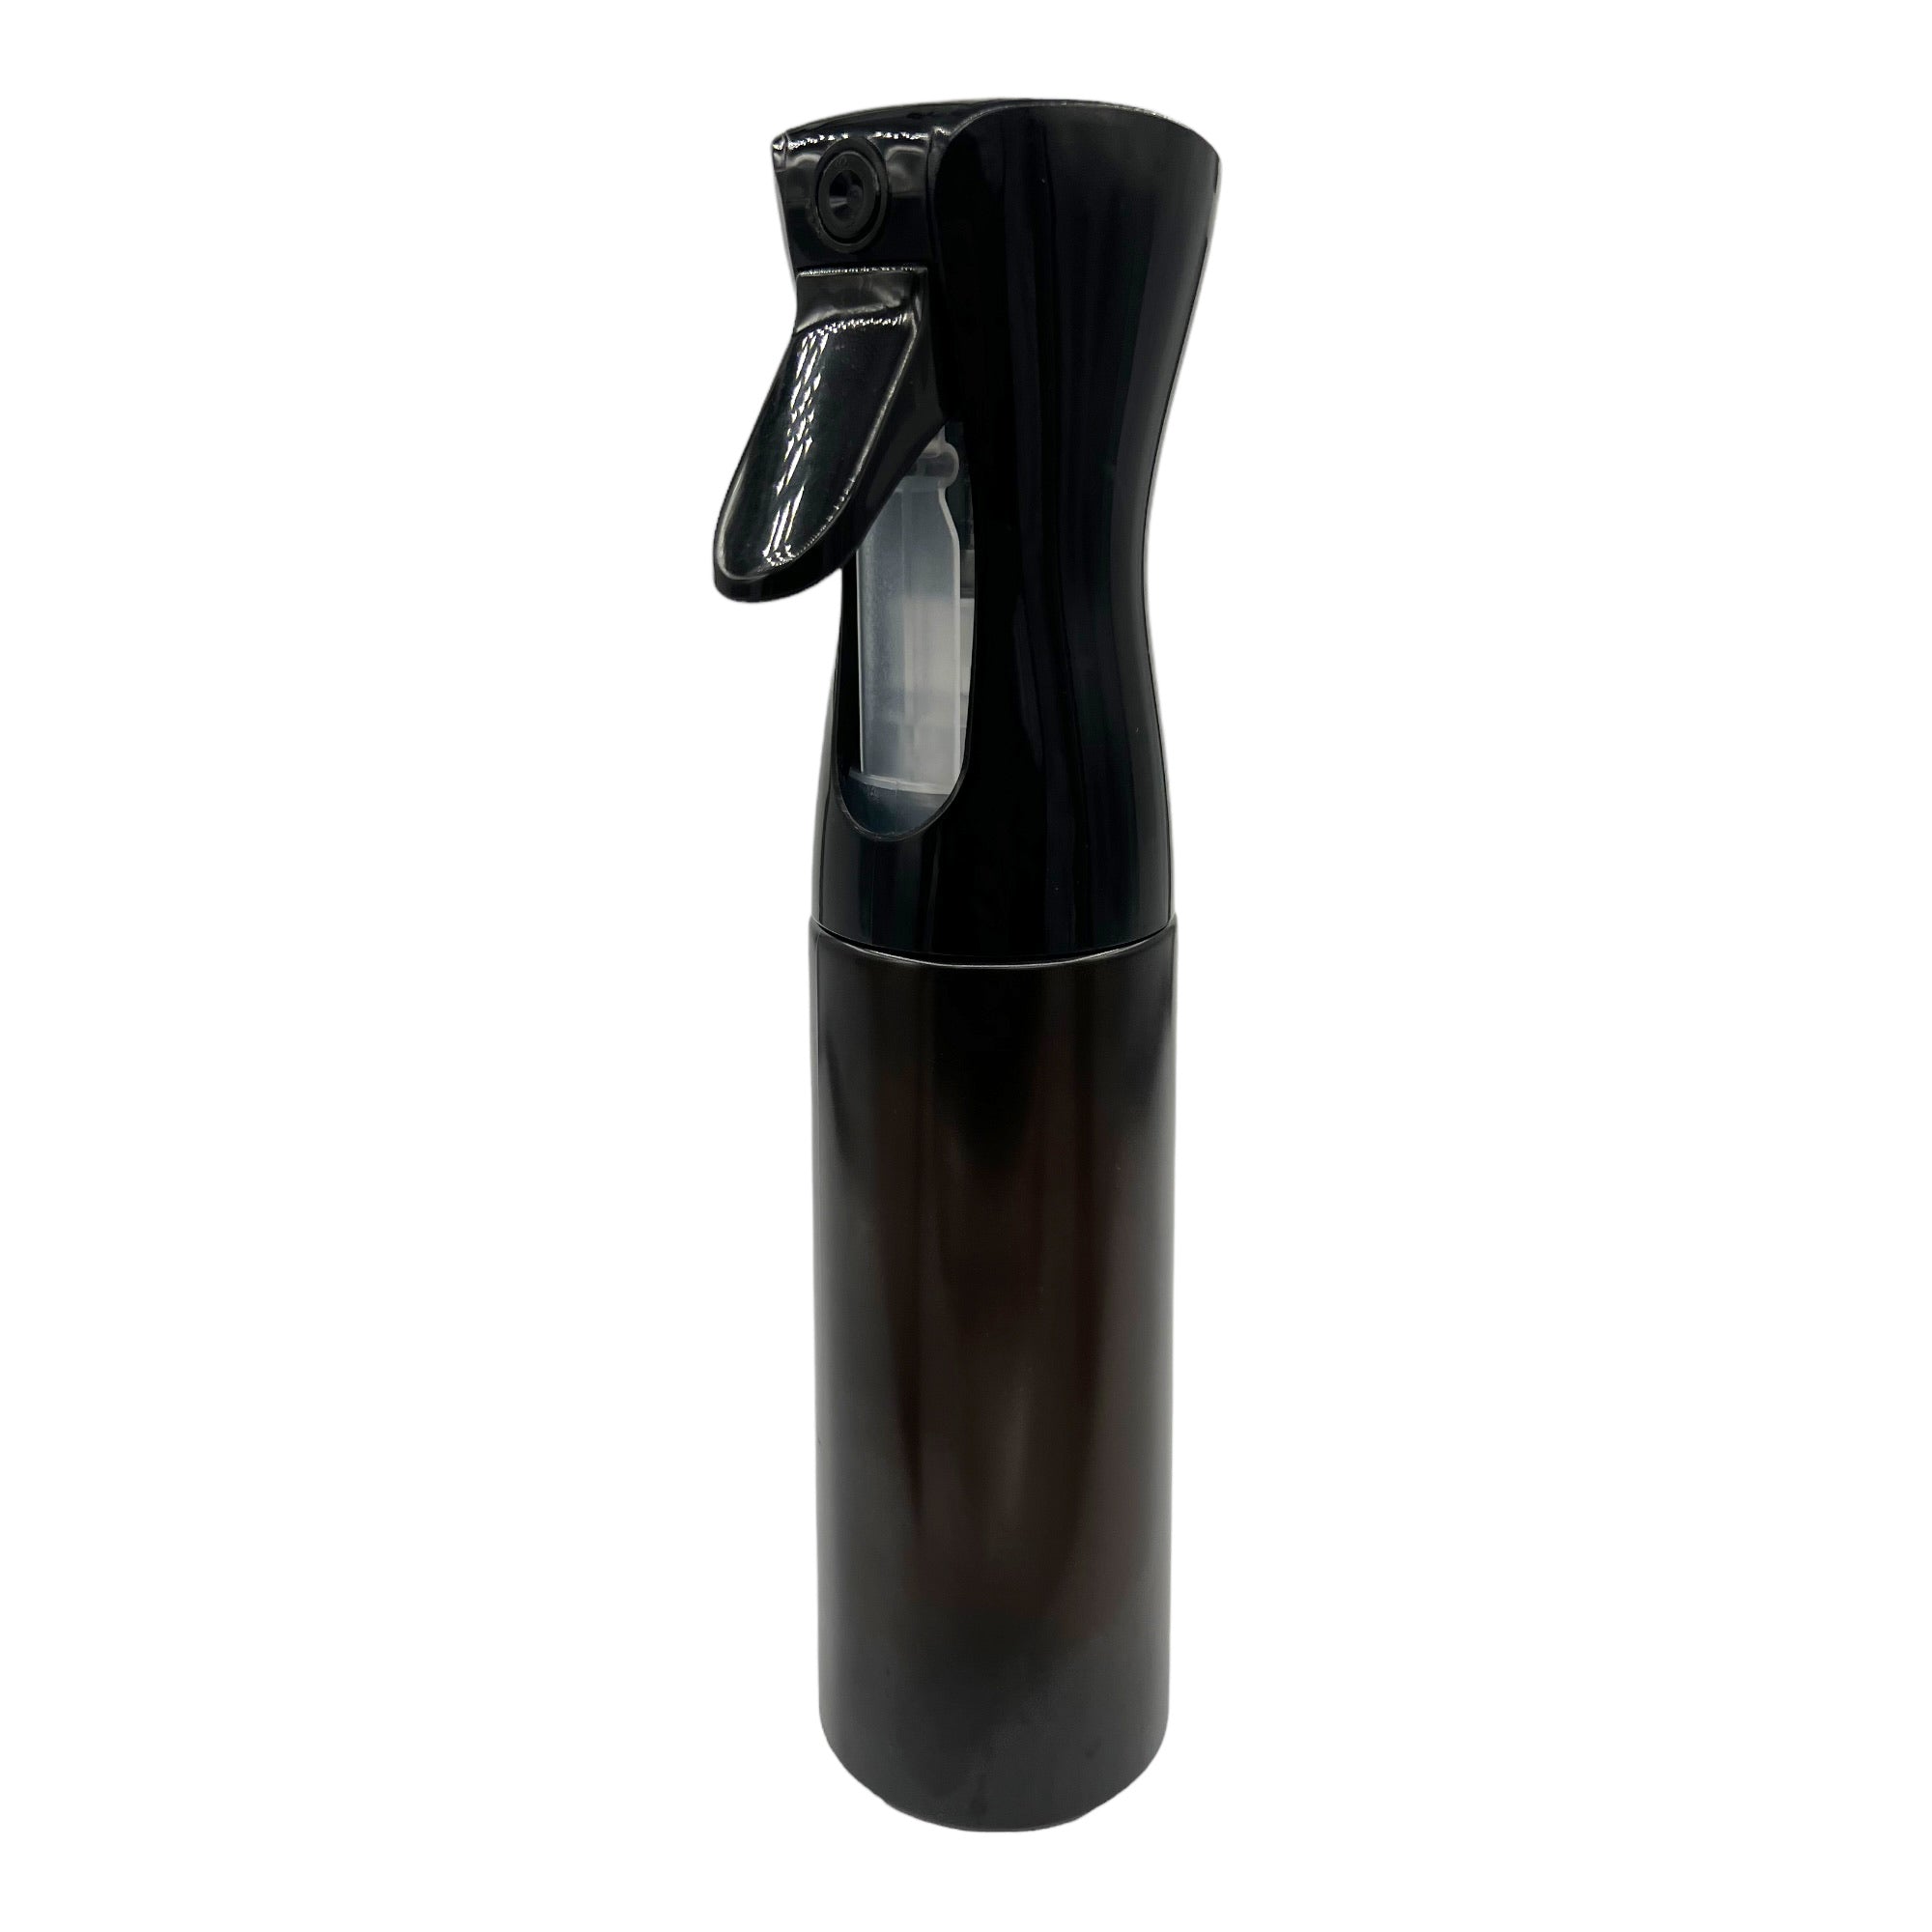 Eson - Water Spray Bottle 300ml Empty Refillable Continuous Water (Black)